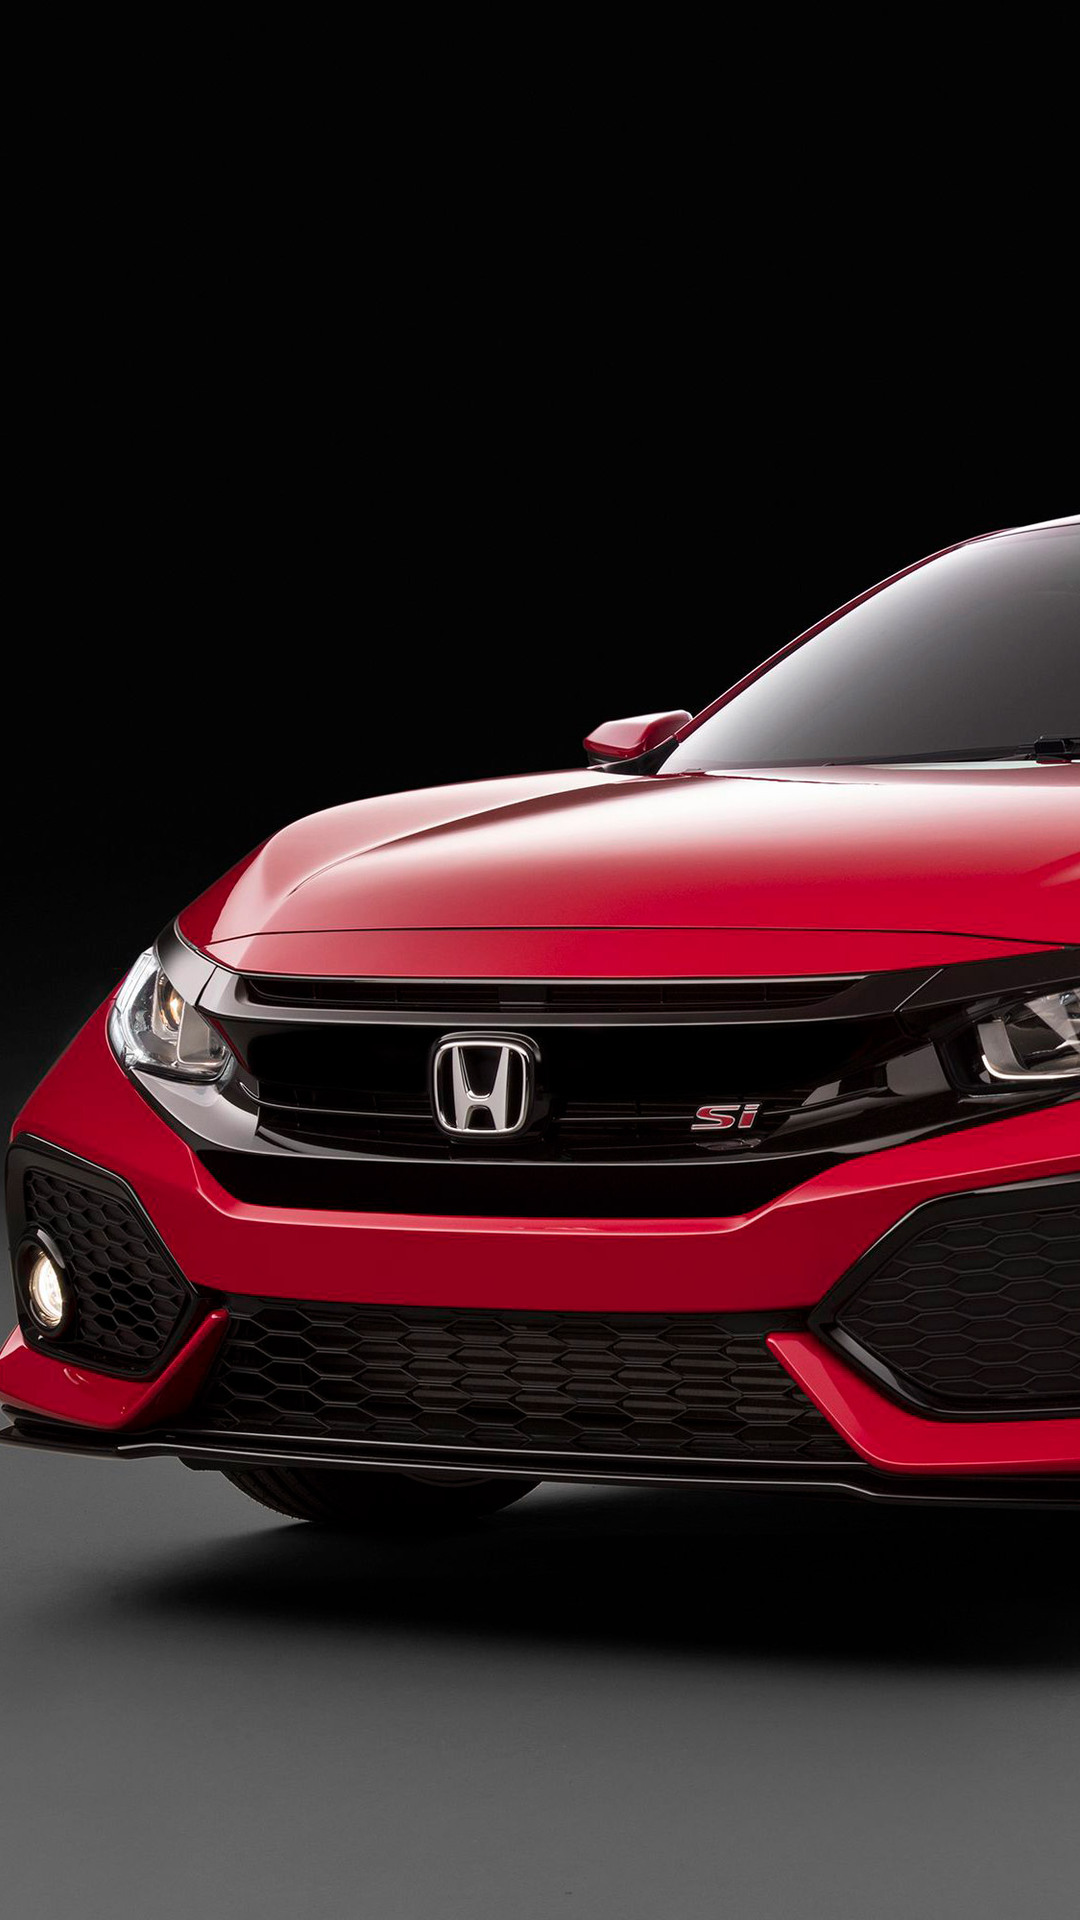 1080x1920 Honda Civic SI 2017 Iphone 7,6s,6 Plus, Pixel xl ,One Plus 3,3t,5 HD  4k Wallpapers, Images, Backgrounds, Photos and Pictures